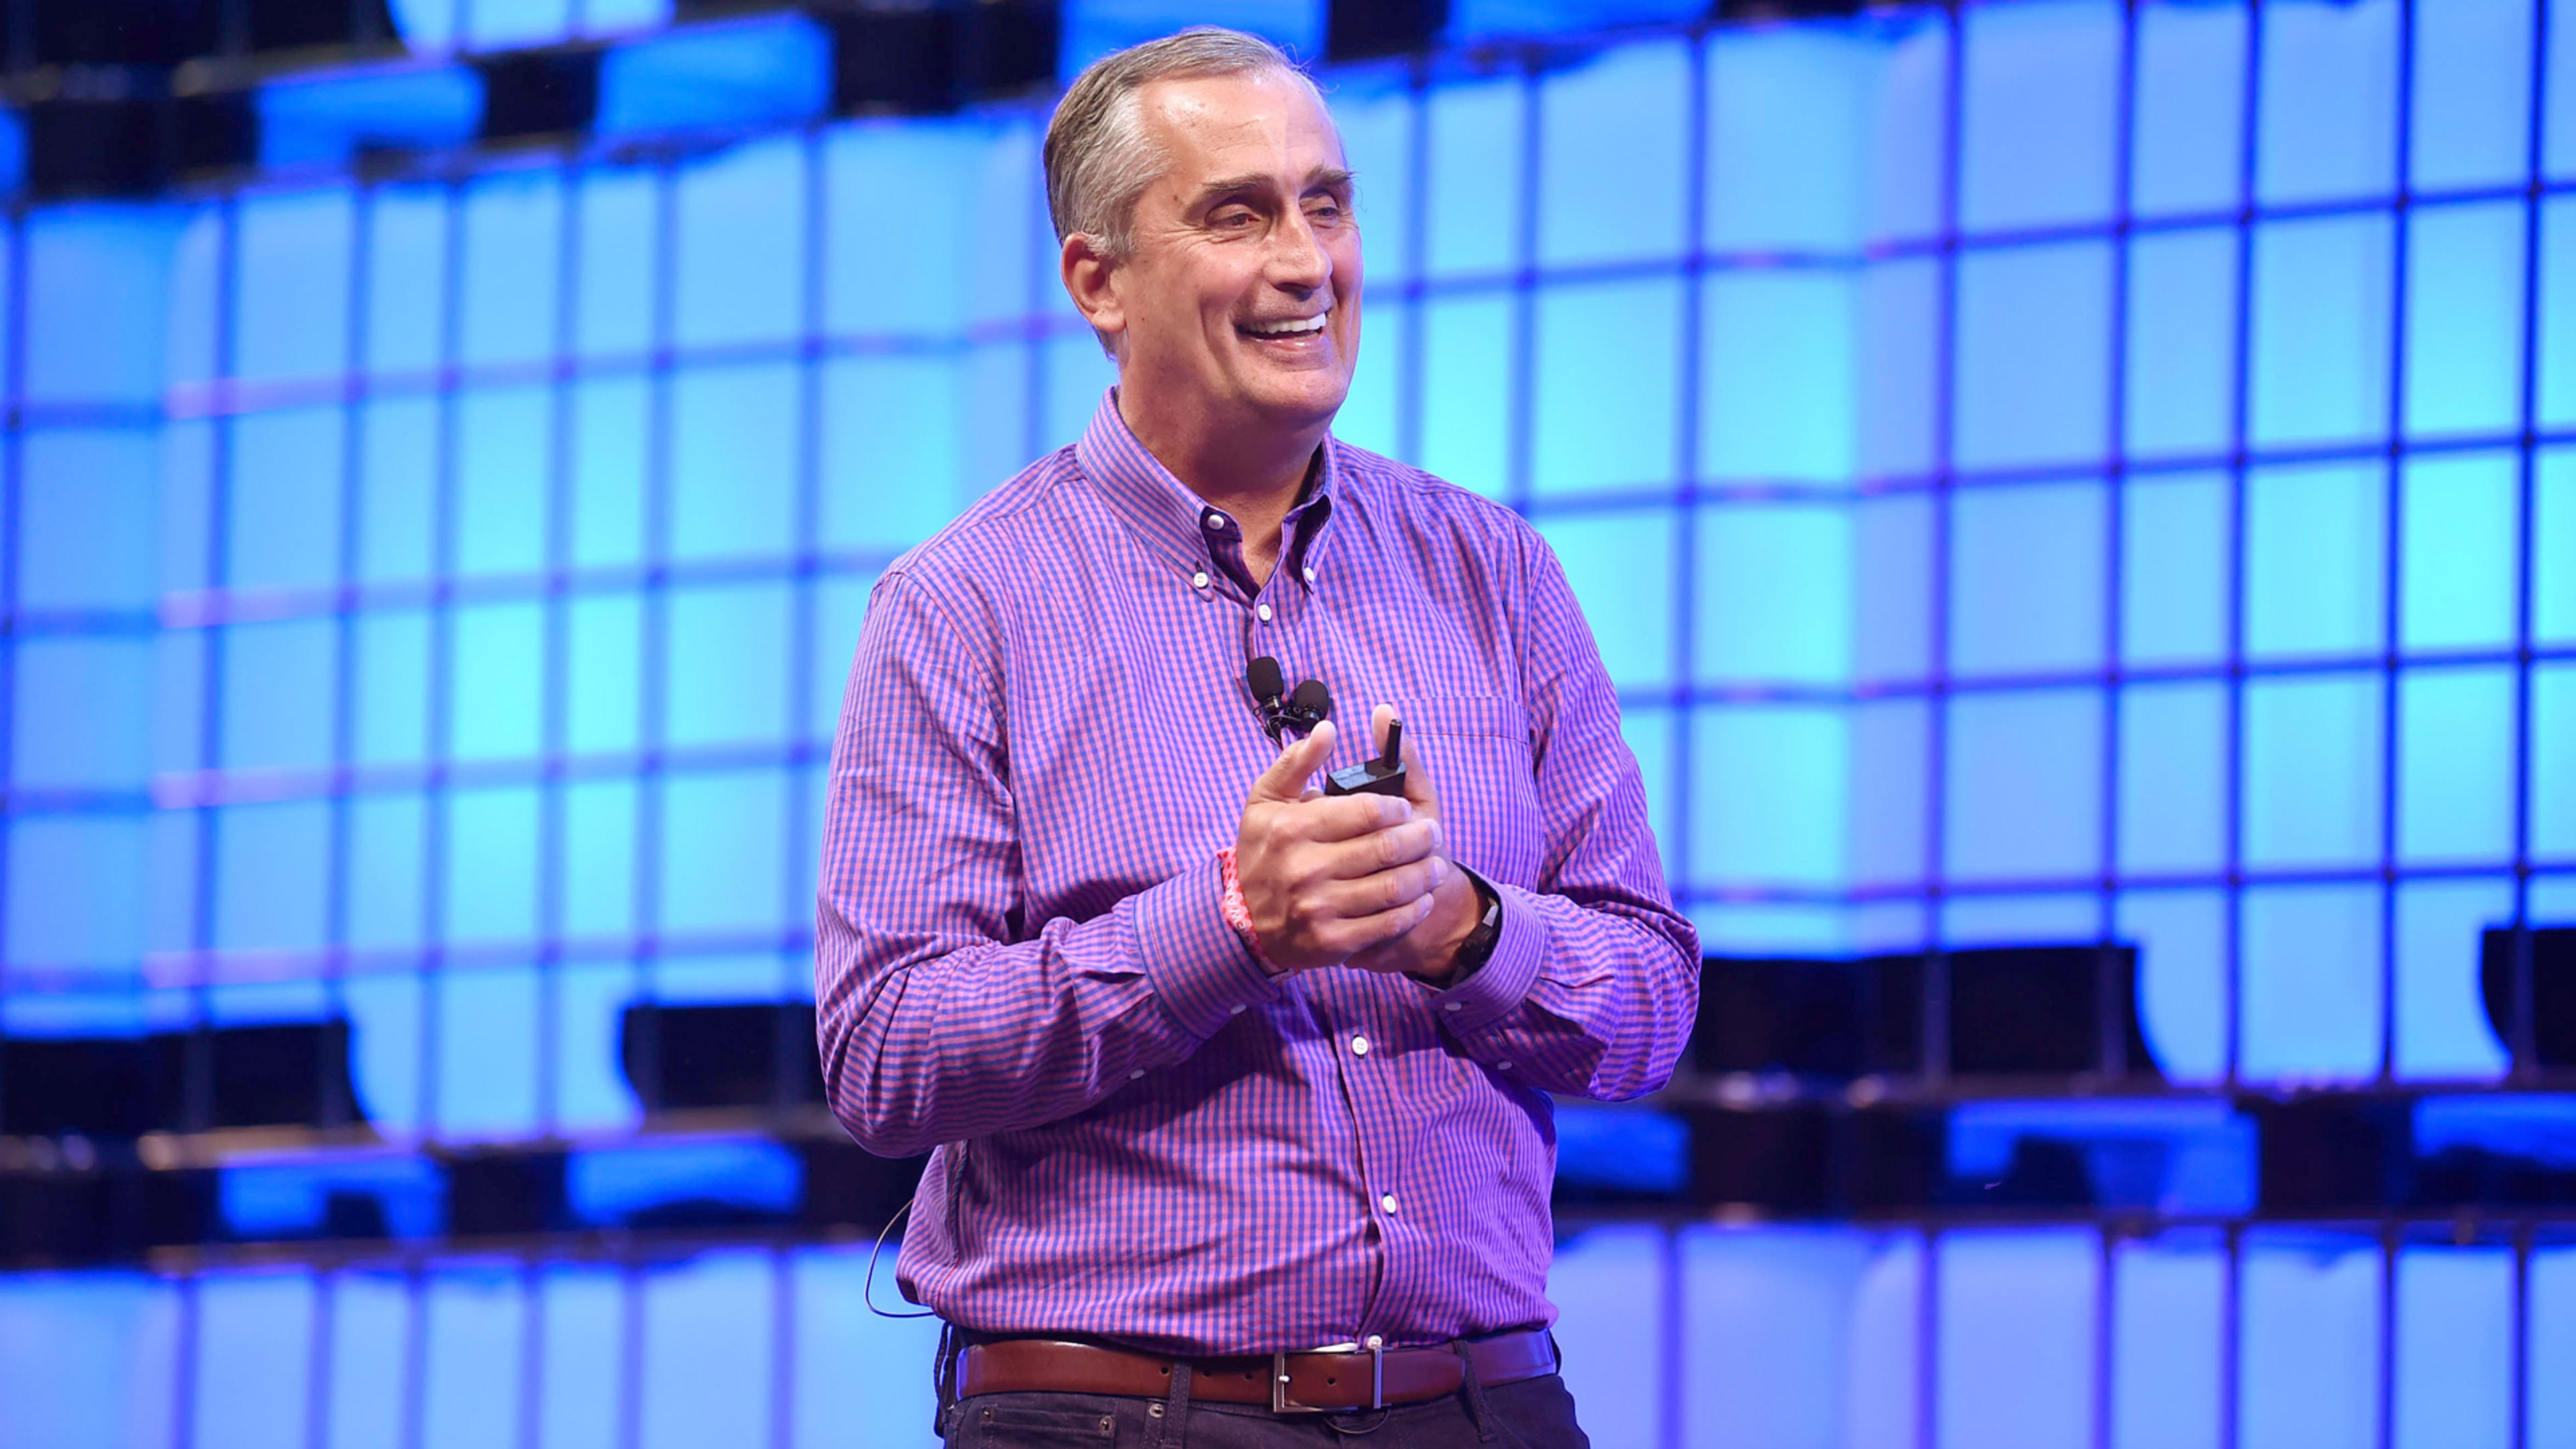 Intel: CEO Brian Krzanich is out after “consensual relationship” with employee